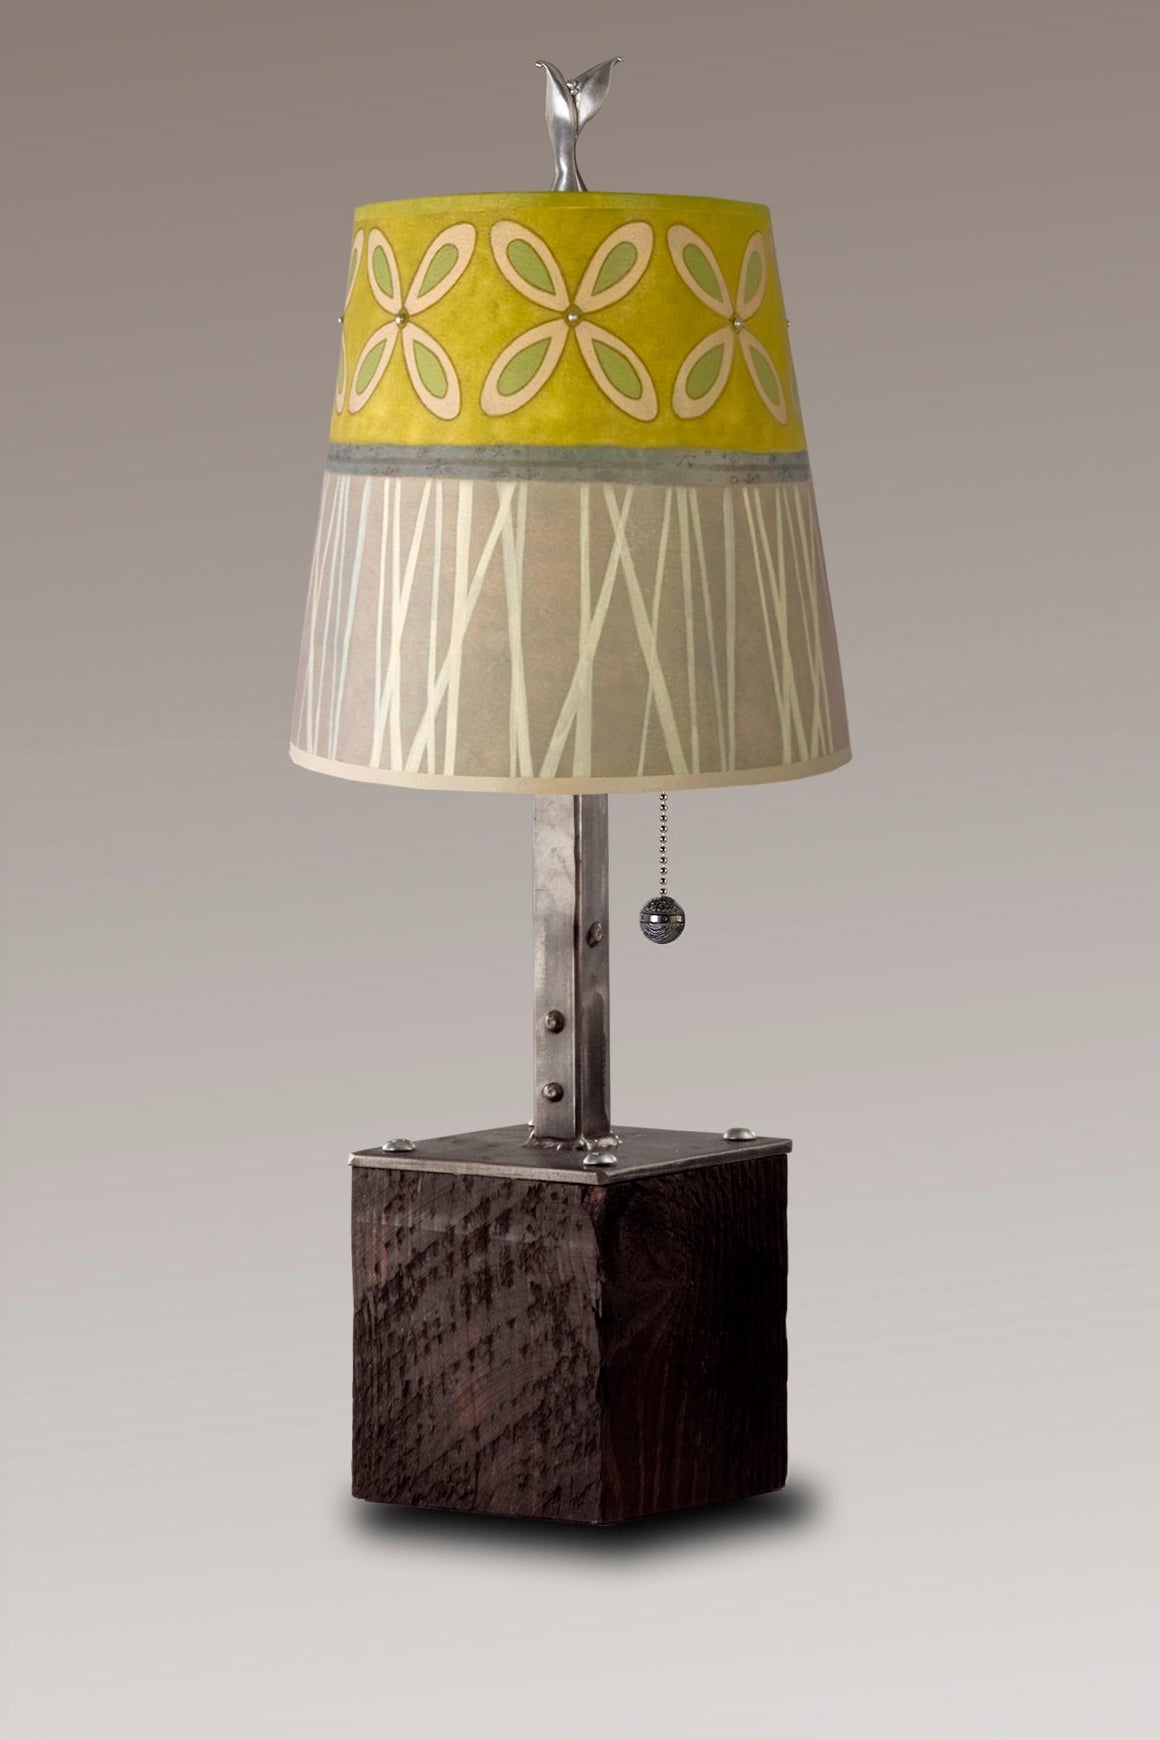 Steel Table Lamp on Reclaimed Wood with Small Drum Shade in Kiwi